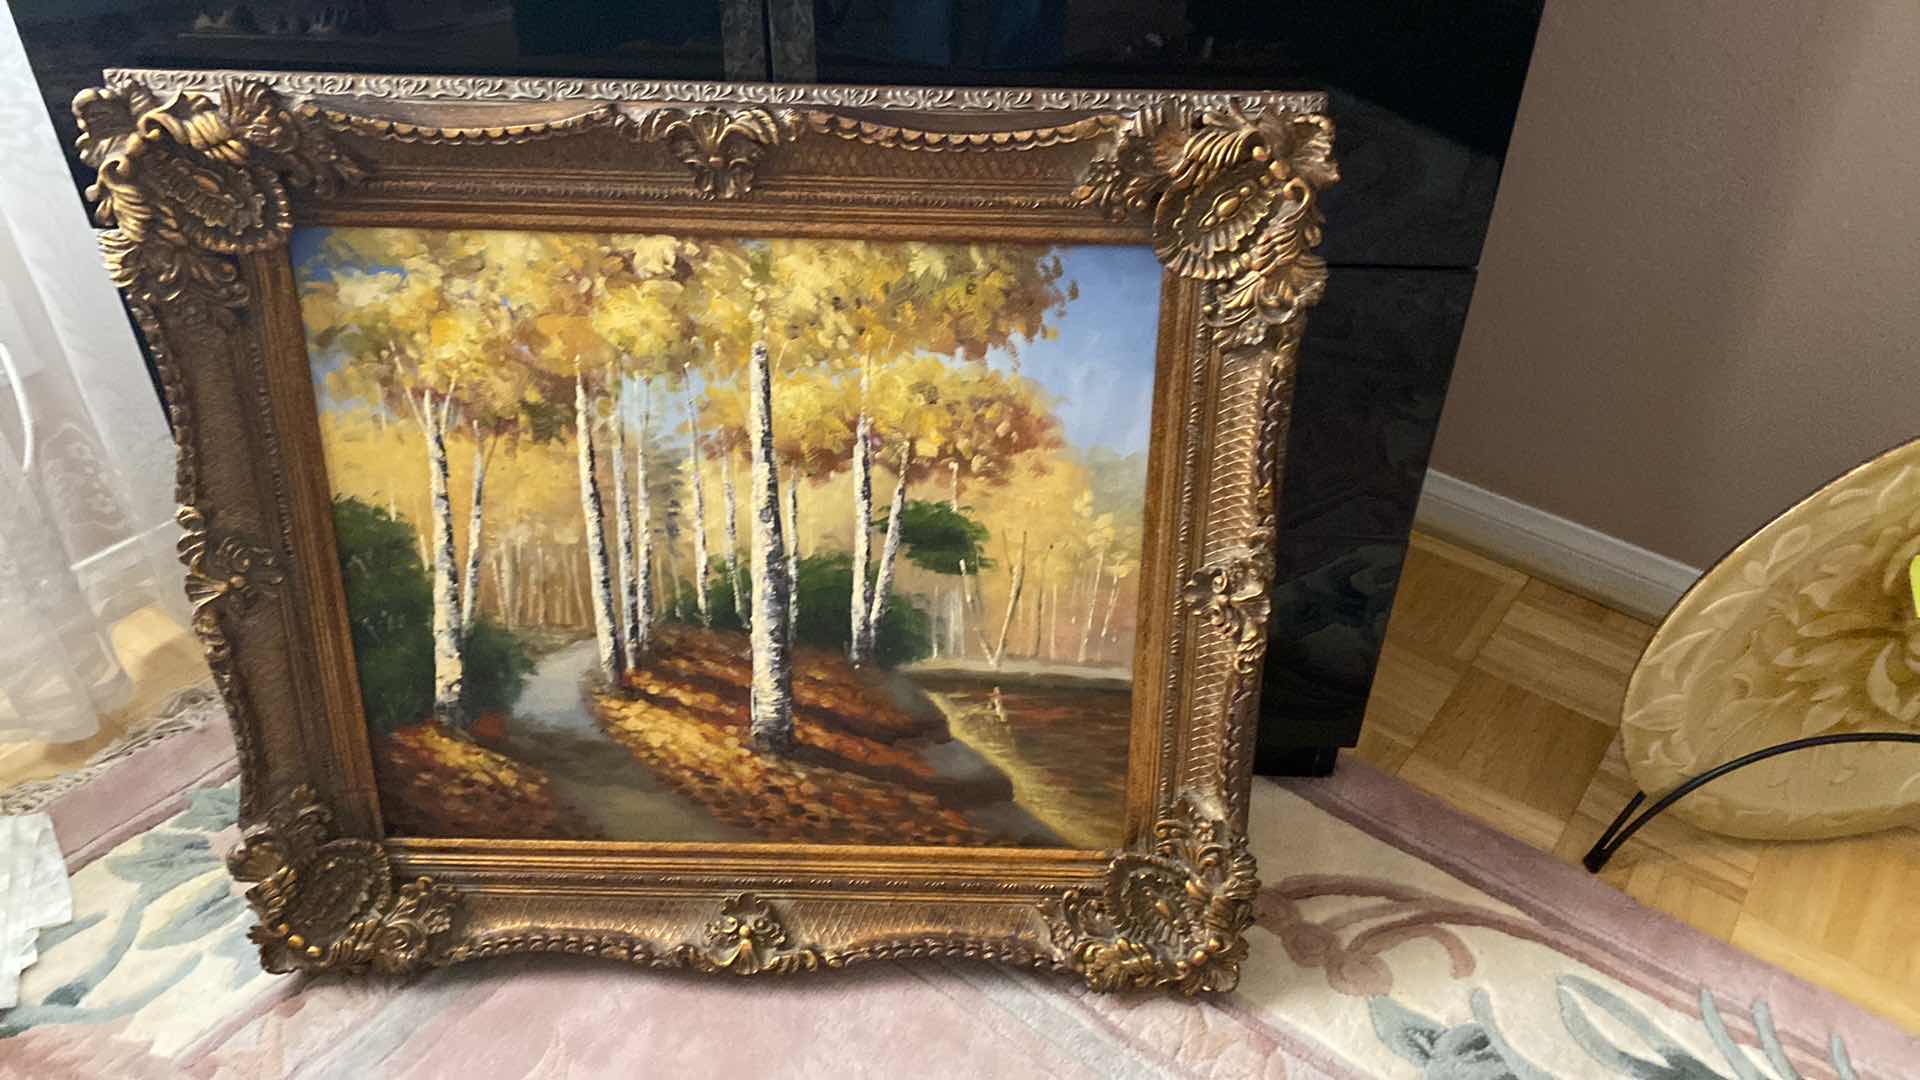 Photo 1 of ORNATE FRAMED ARTWORK, OIL PAINTING LANDSCAPE WITH TREES 32” X 27”